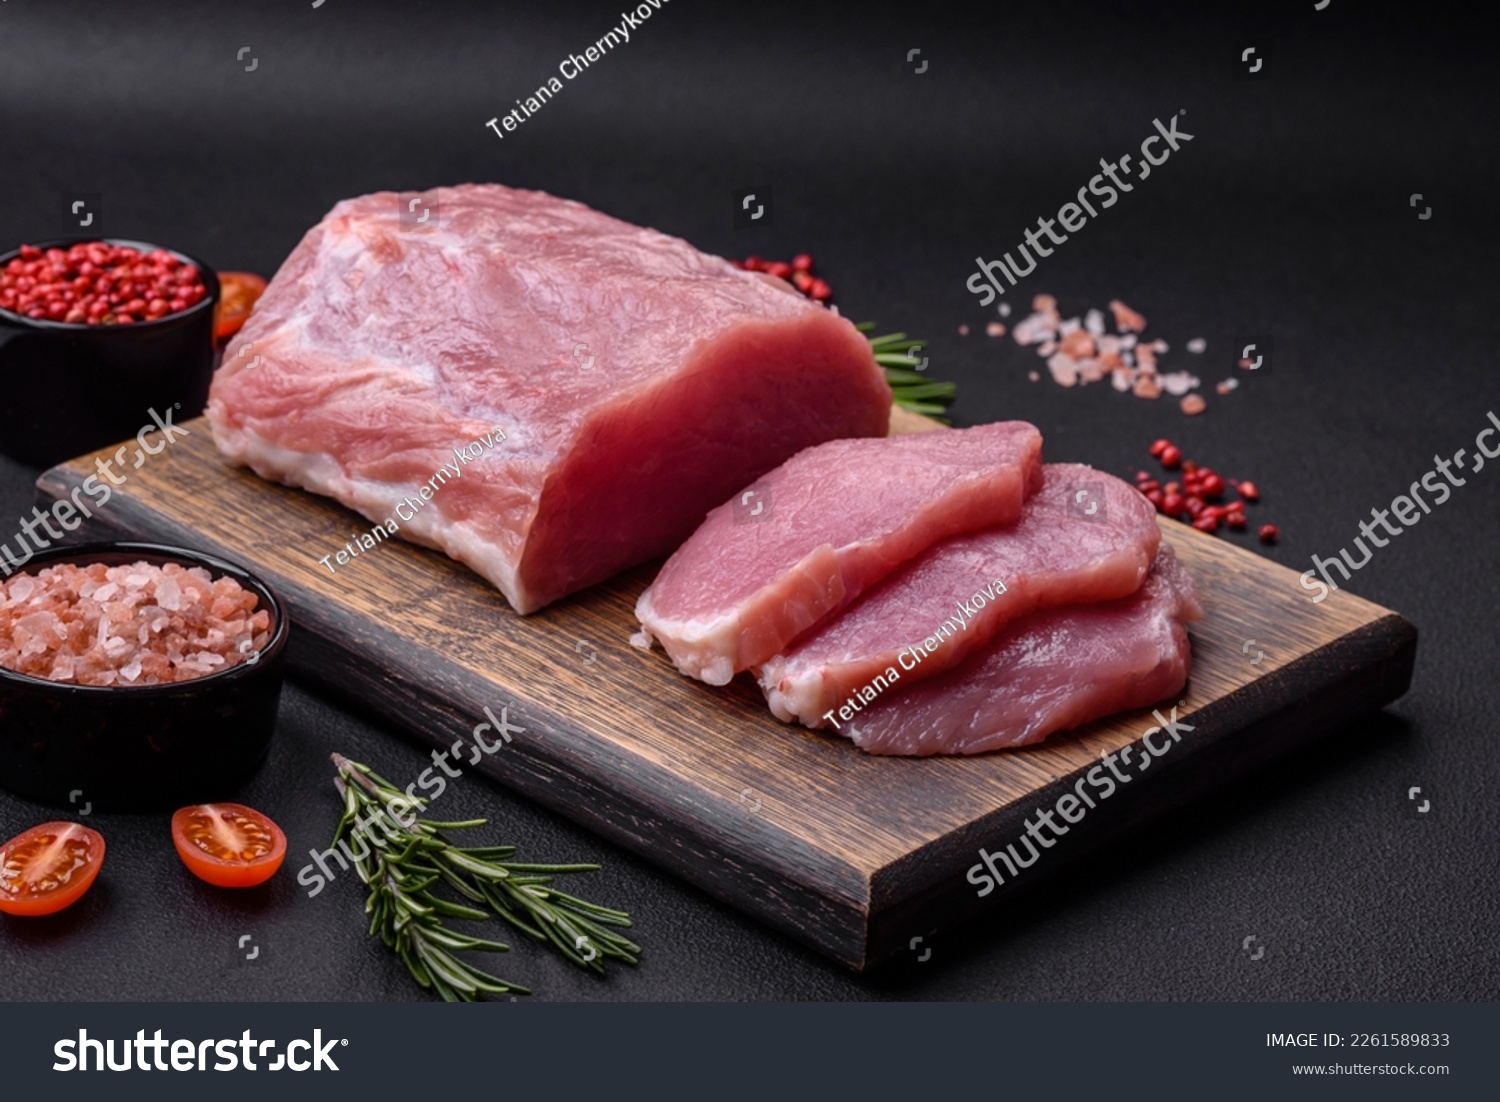 A piece of raw fresh pork on a wooden cutting board with spices and herbs on a dark concrete background #2261589833